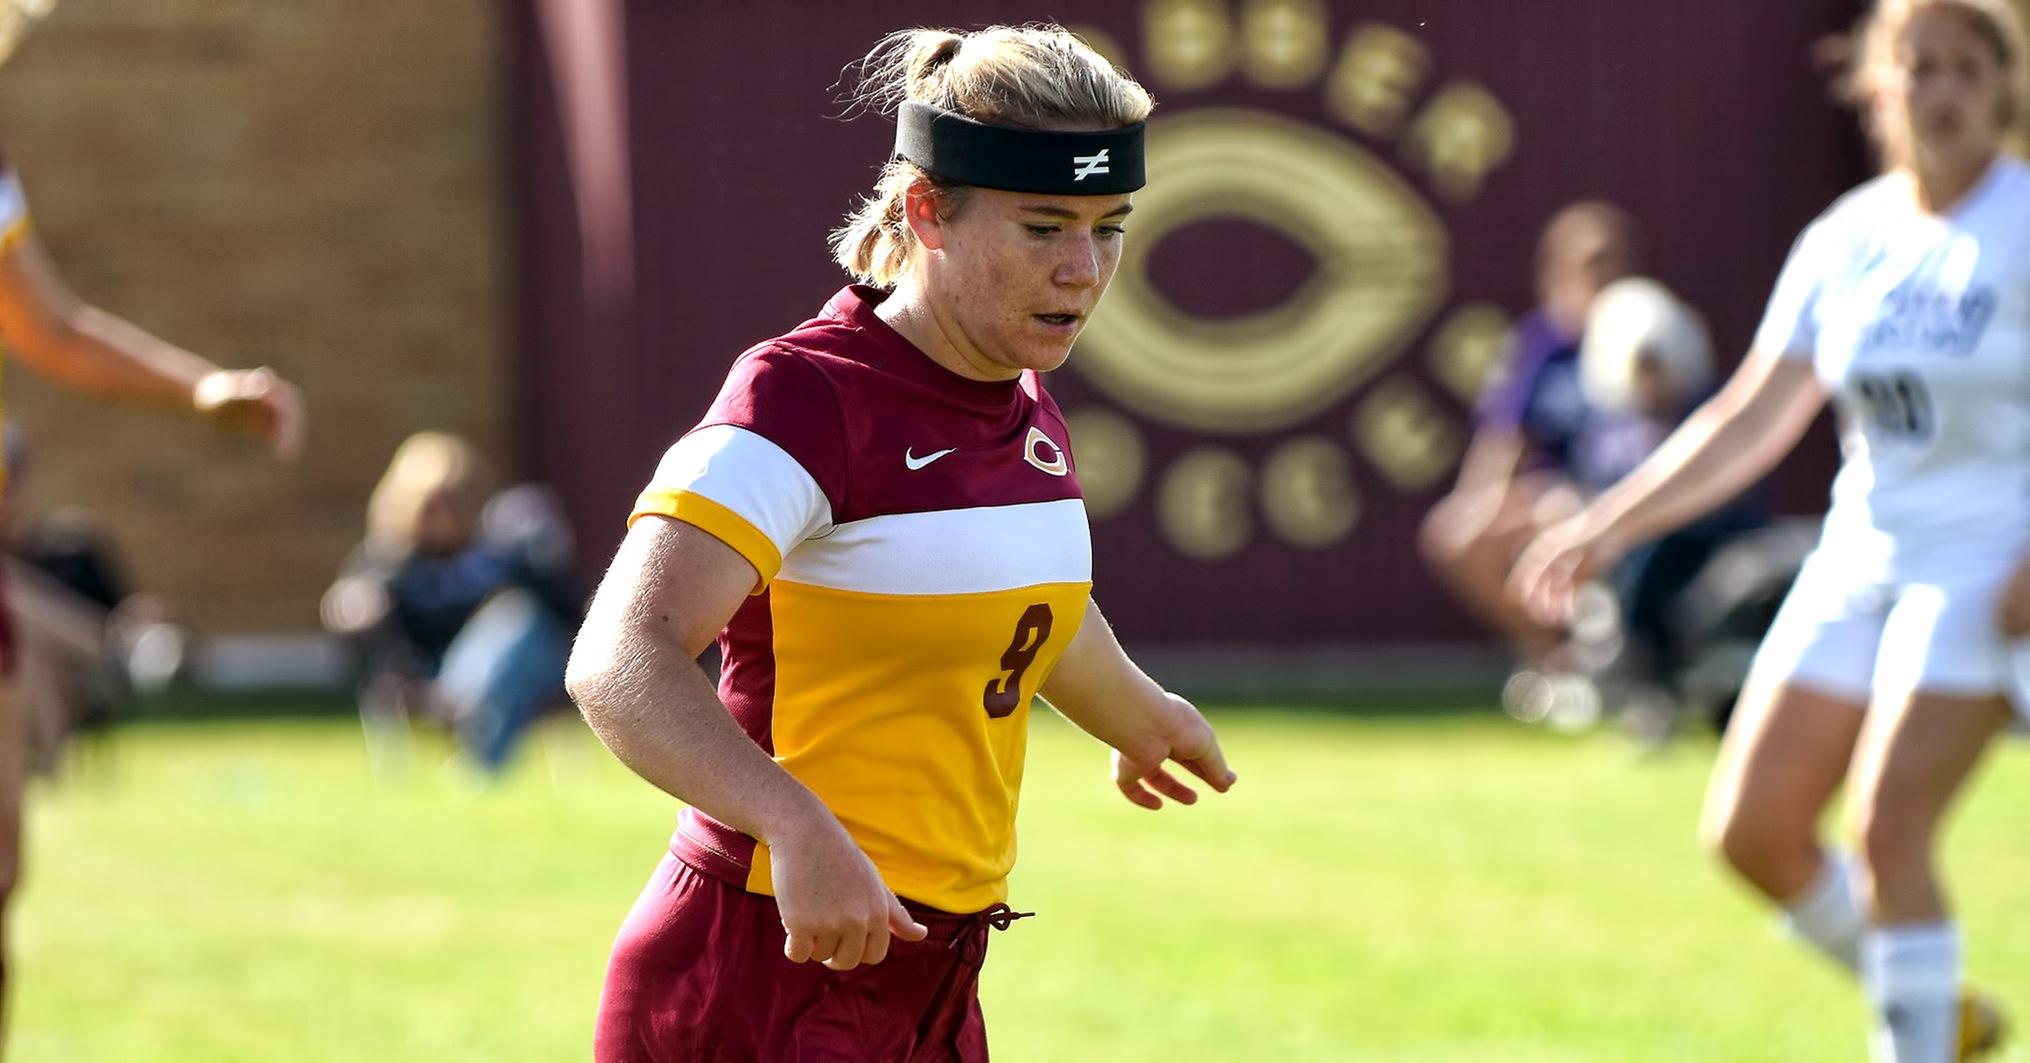 Freshman Grace Lawlor scored her first collegiate goal against Wis.-Superior. It was the game-winning score in the Cobbers' 3-0 win.  